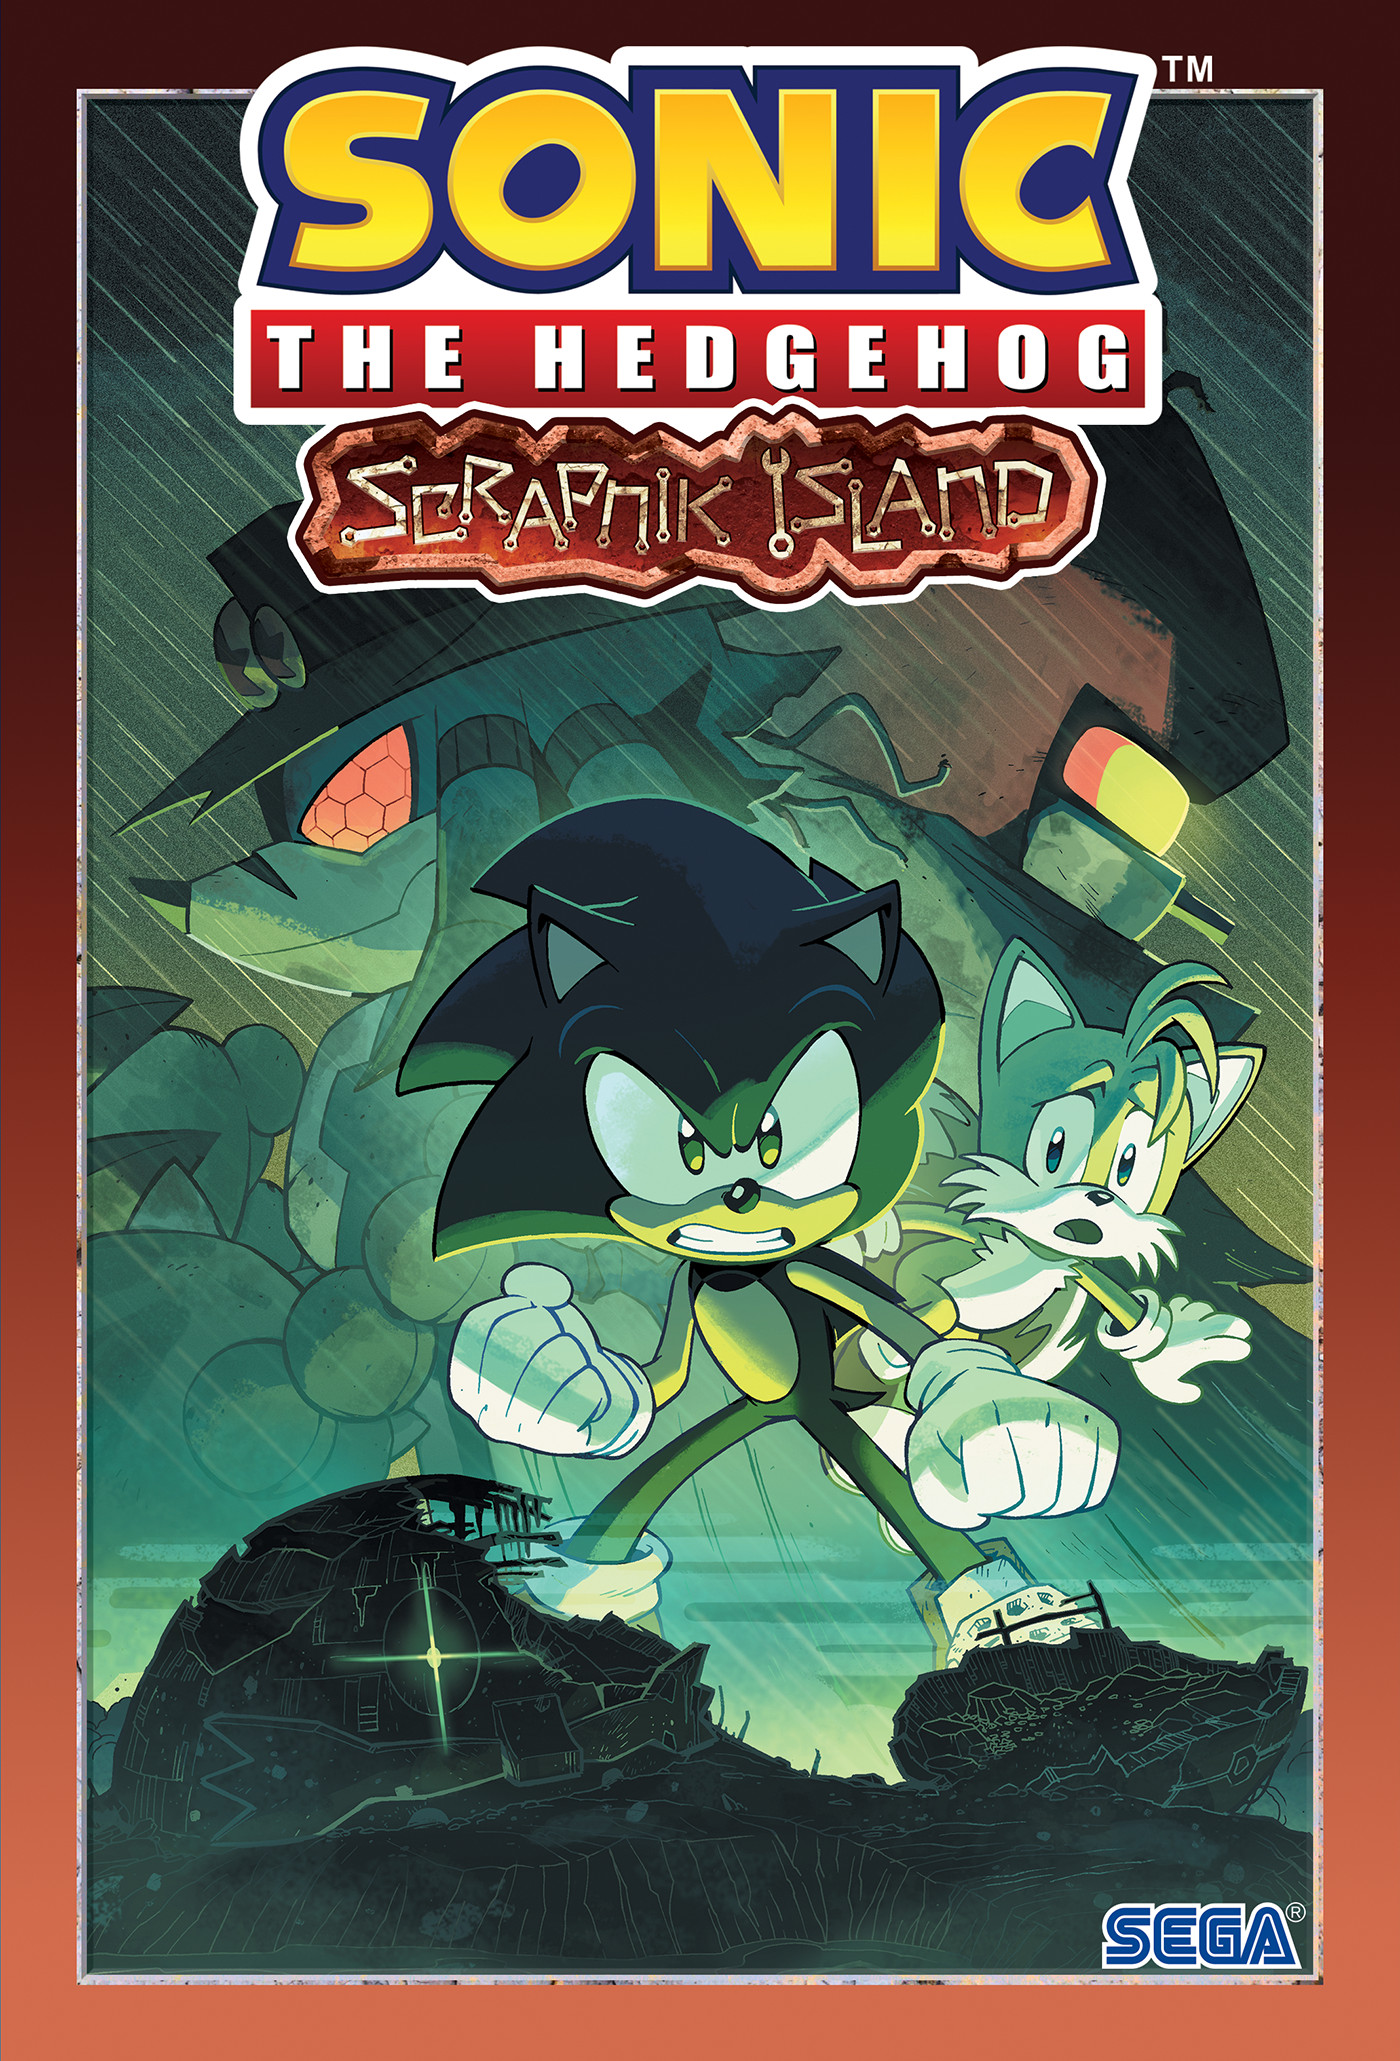 Sonic The Hedgehog, Vol. 1: Fallout! - By Ian Flynn (paperback